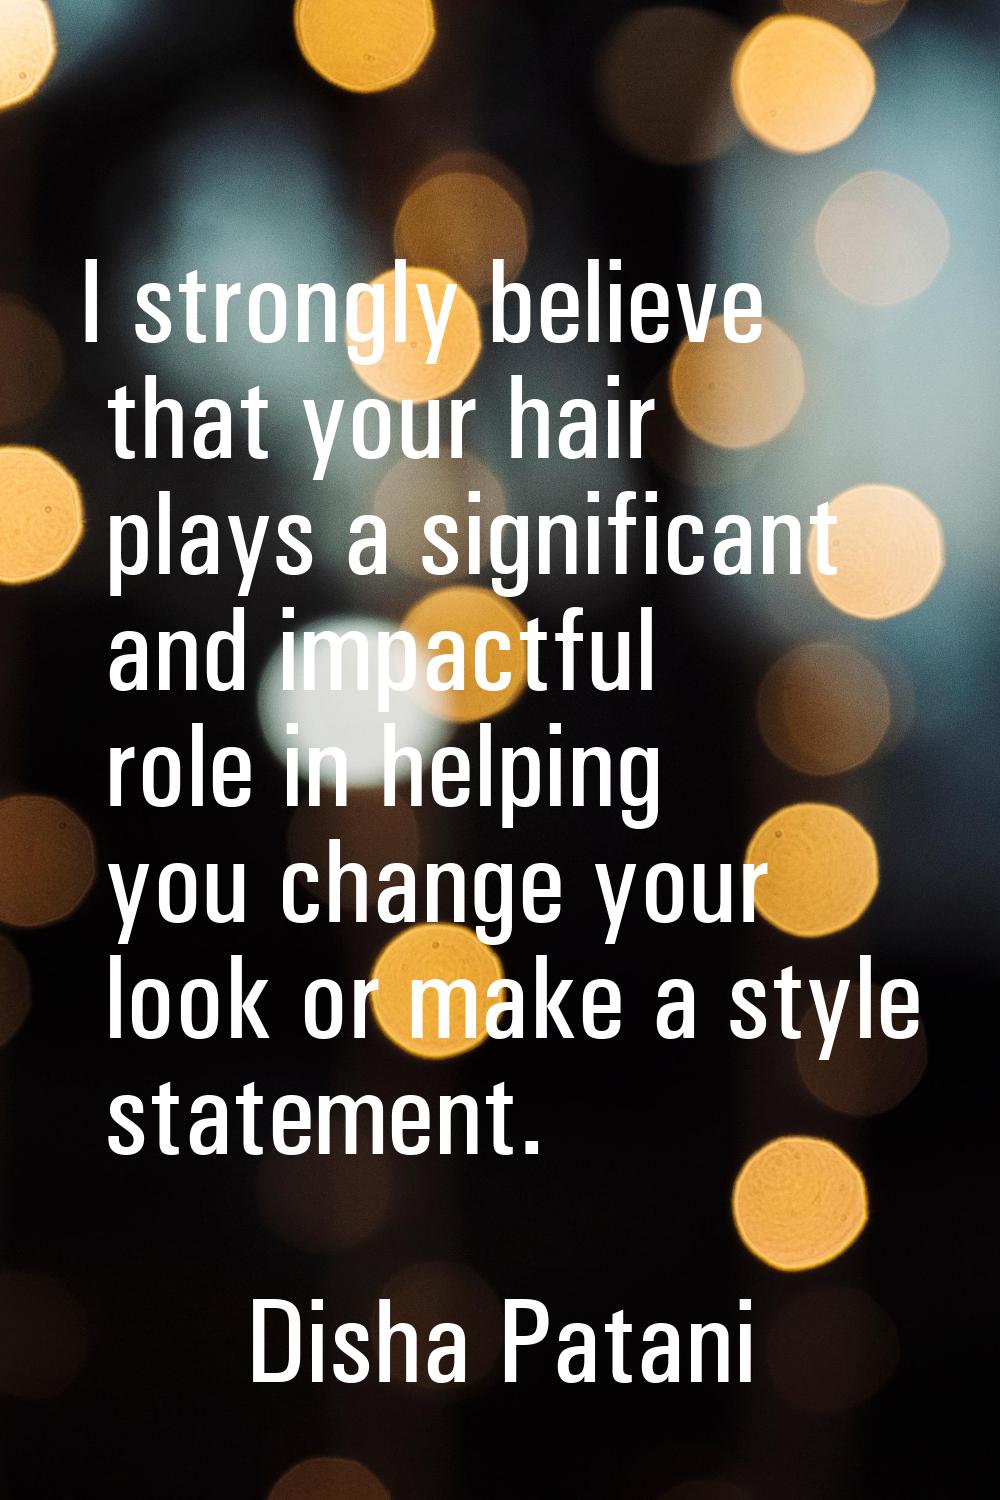 I strongly believe that your hair plays a significant and impactful role in helping you change your